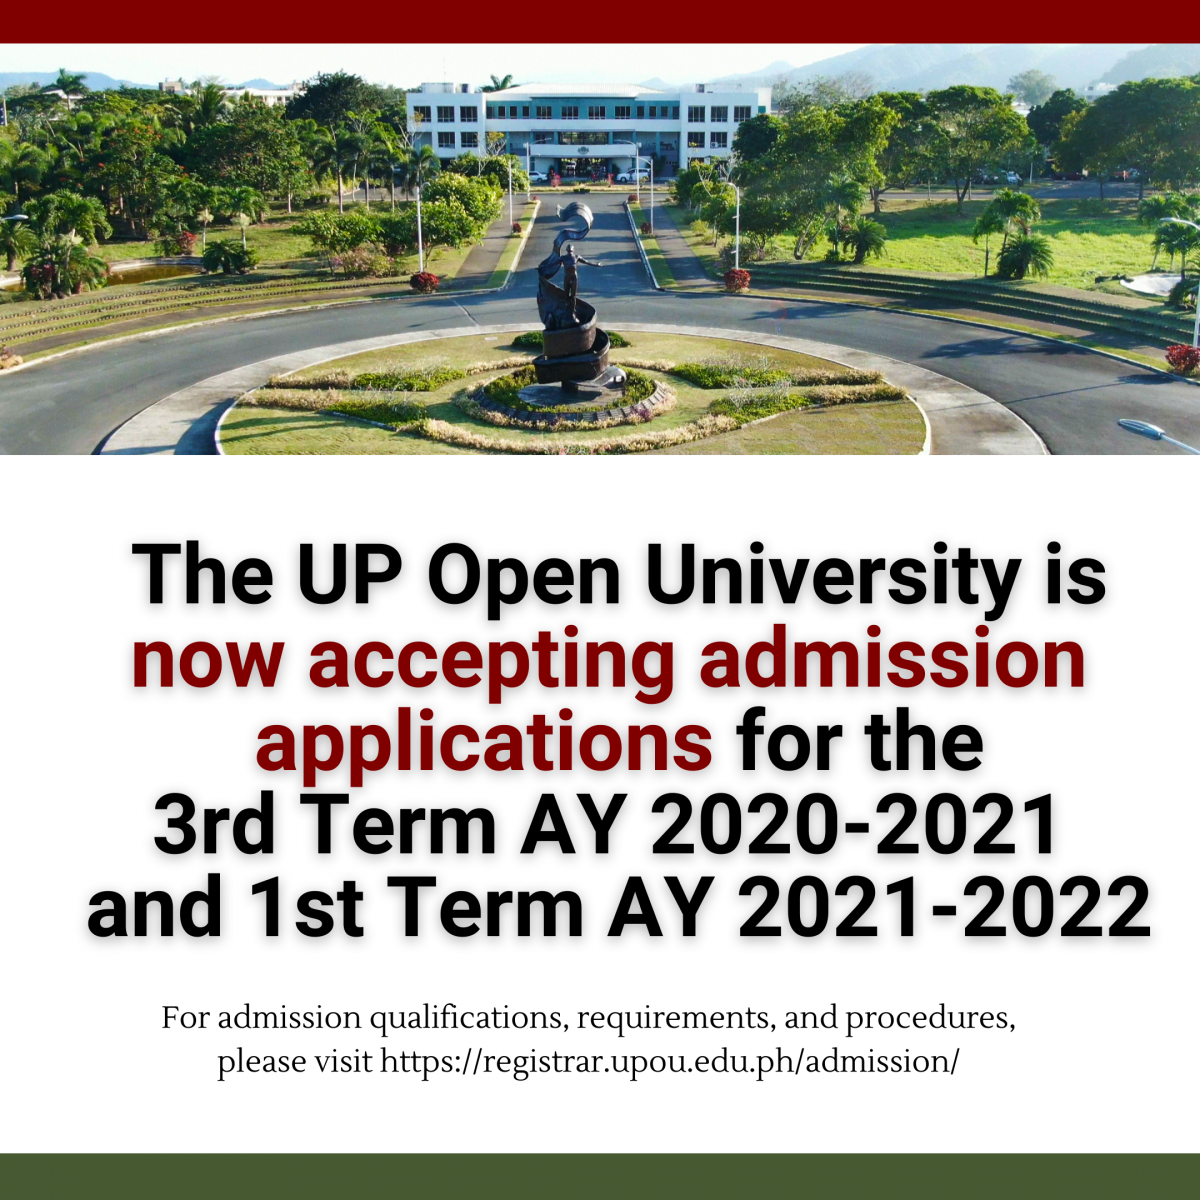 UP Open University is now accepting admission applications for the 3rd Term AY 2020-2021 and 1st Term AY 2021-2022